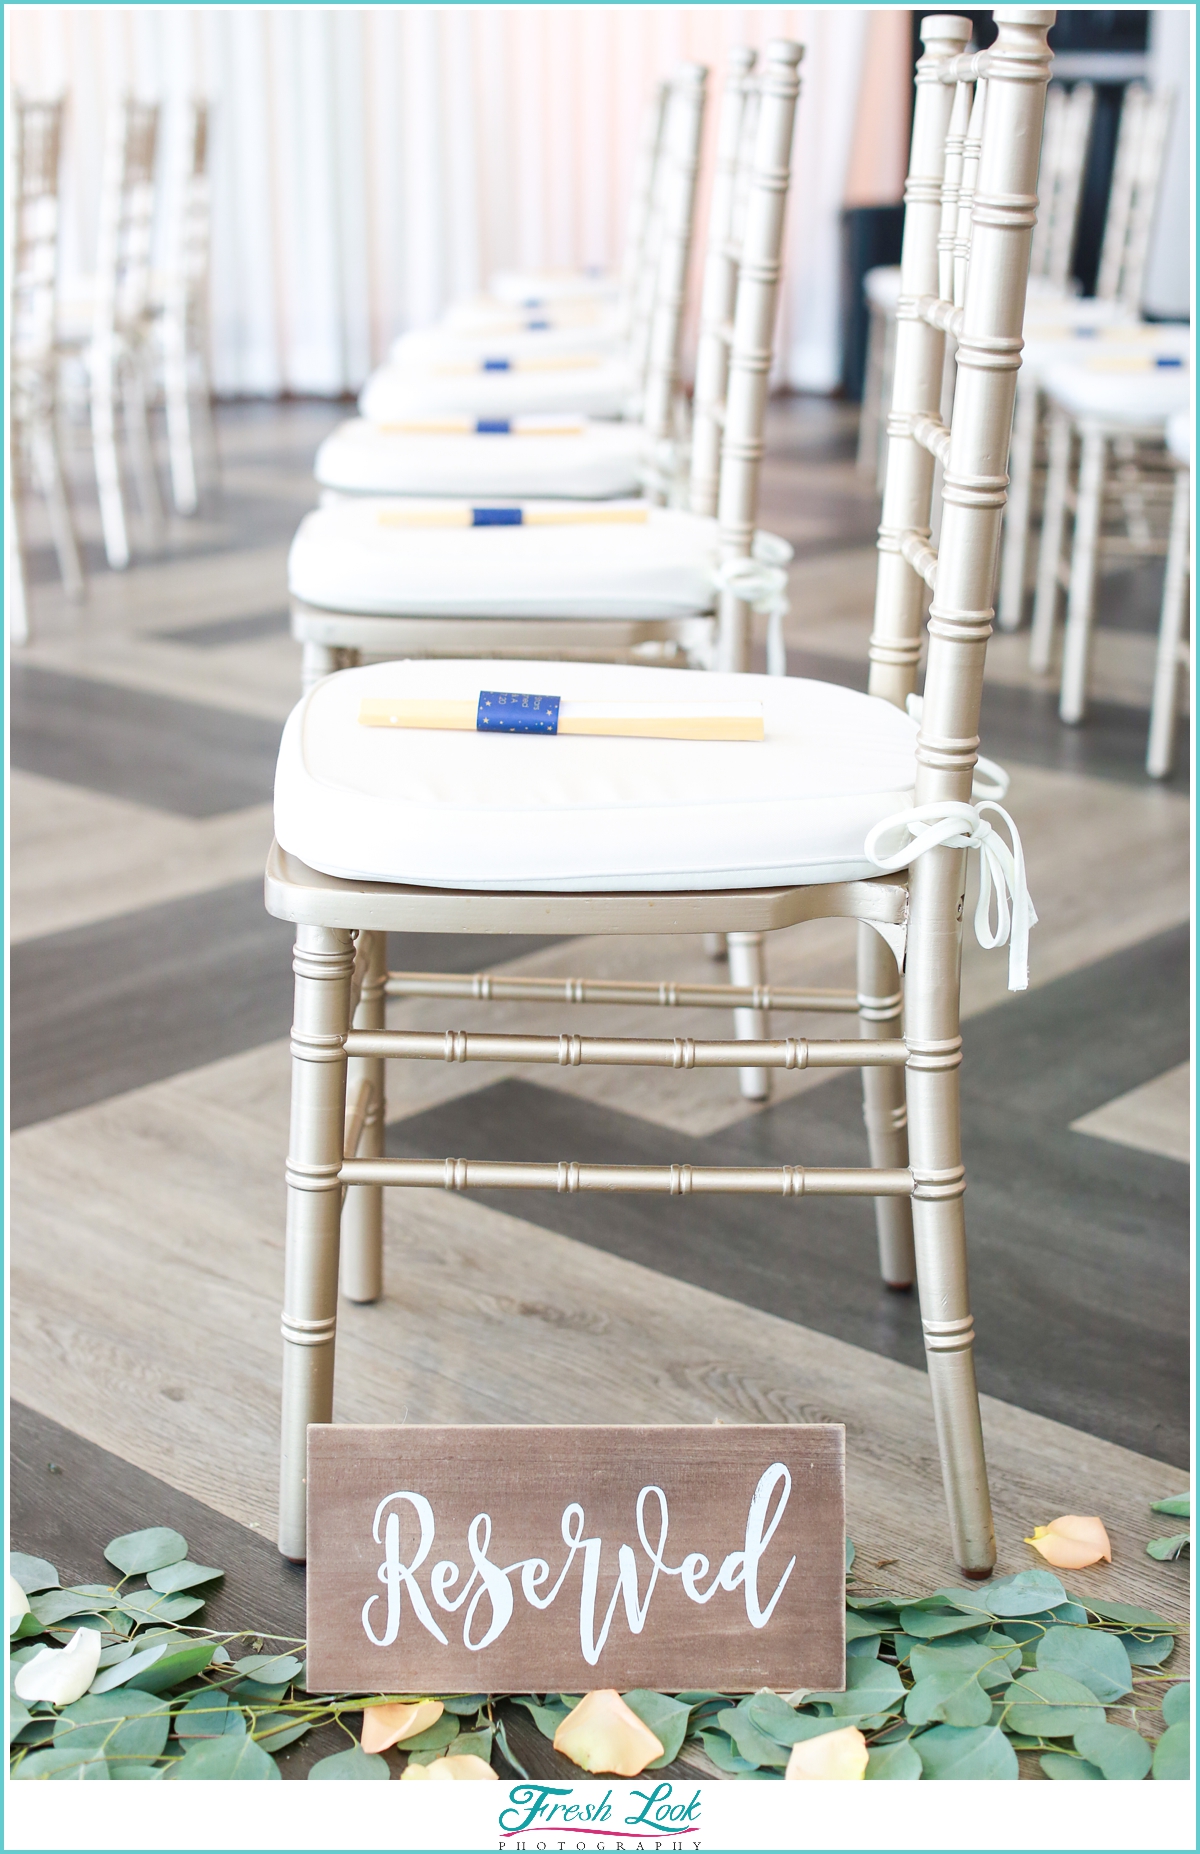 reserved seating at wedding ceremony